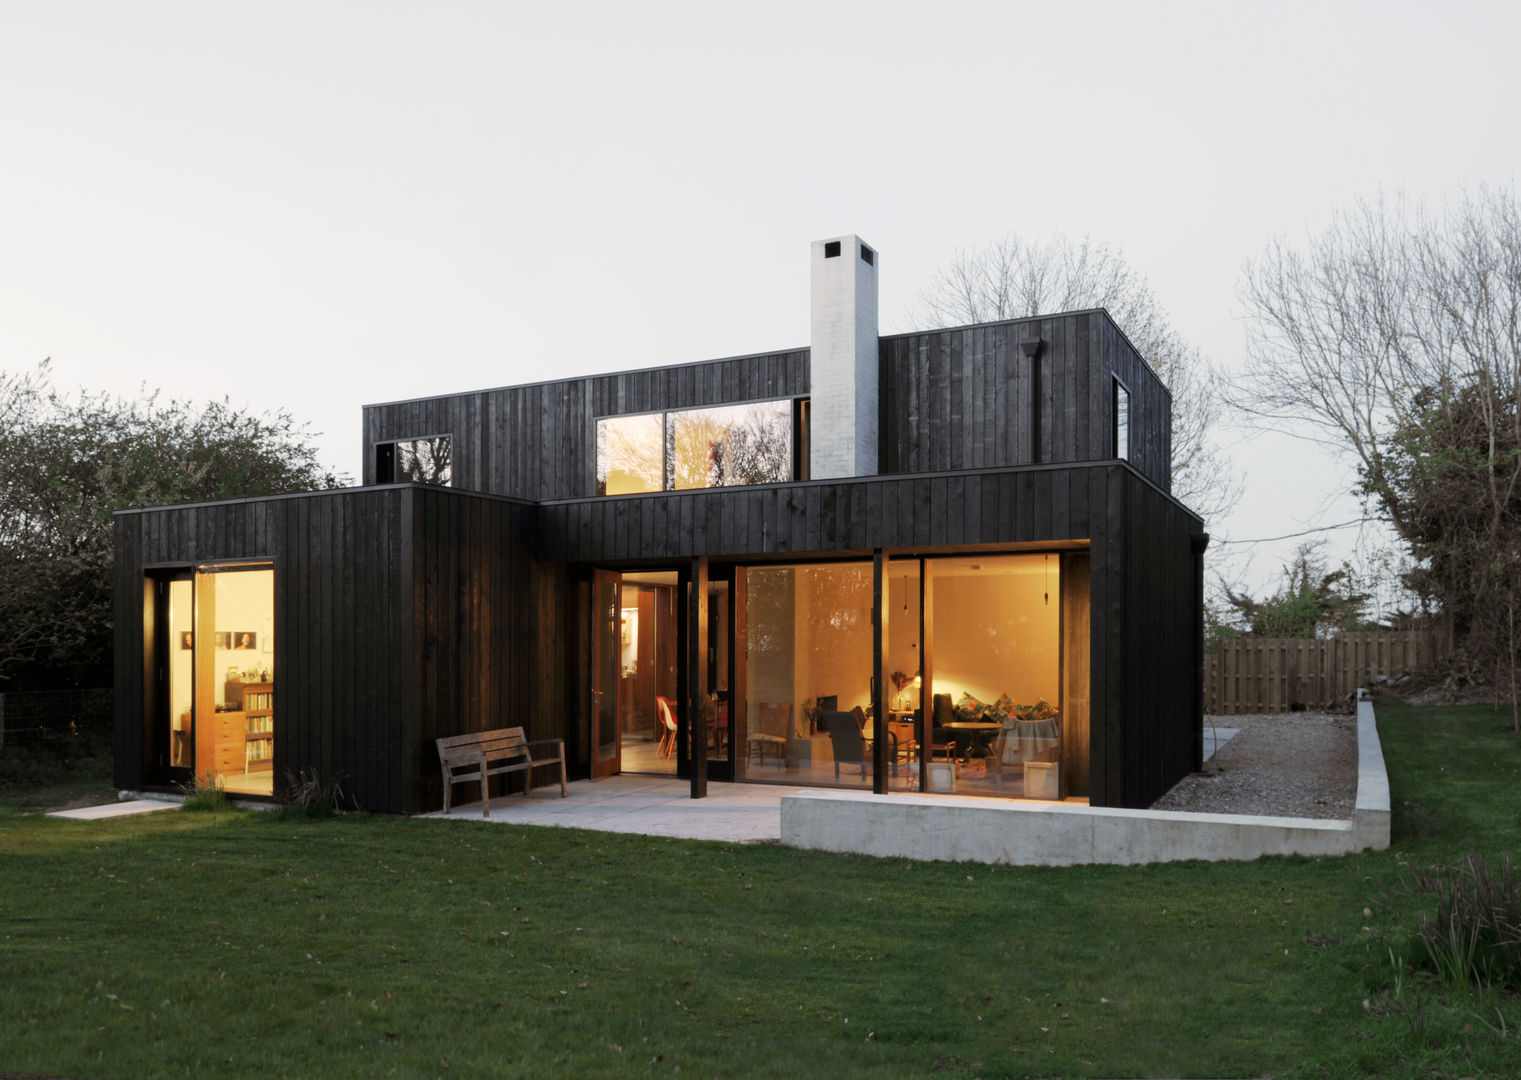 A Timber-Clad House Design on the Isle of Wight: The Sett, Dow Jones Architects Dow Jones Architects Minimalist Evler